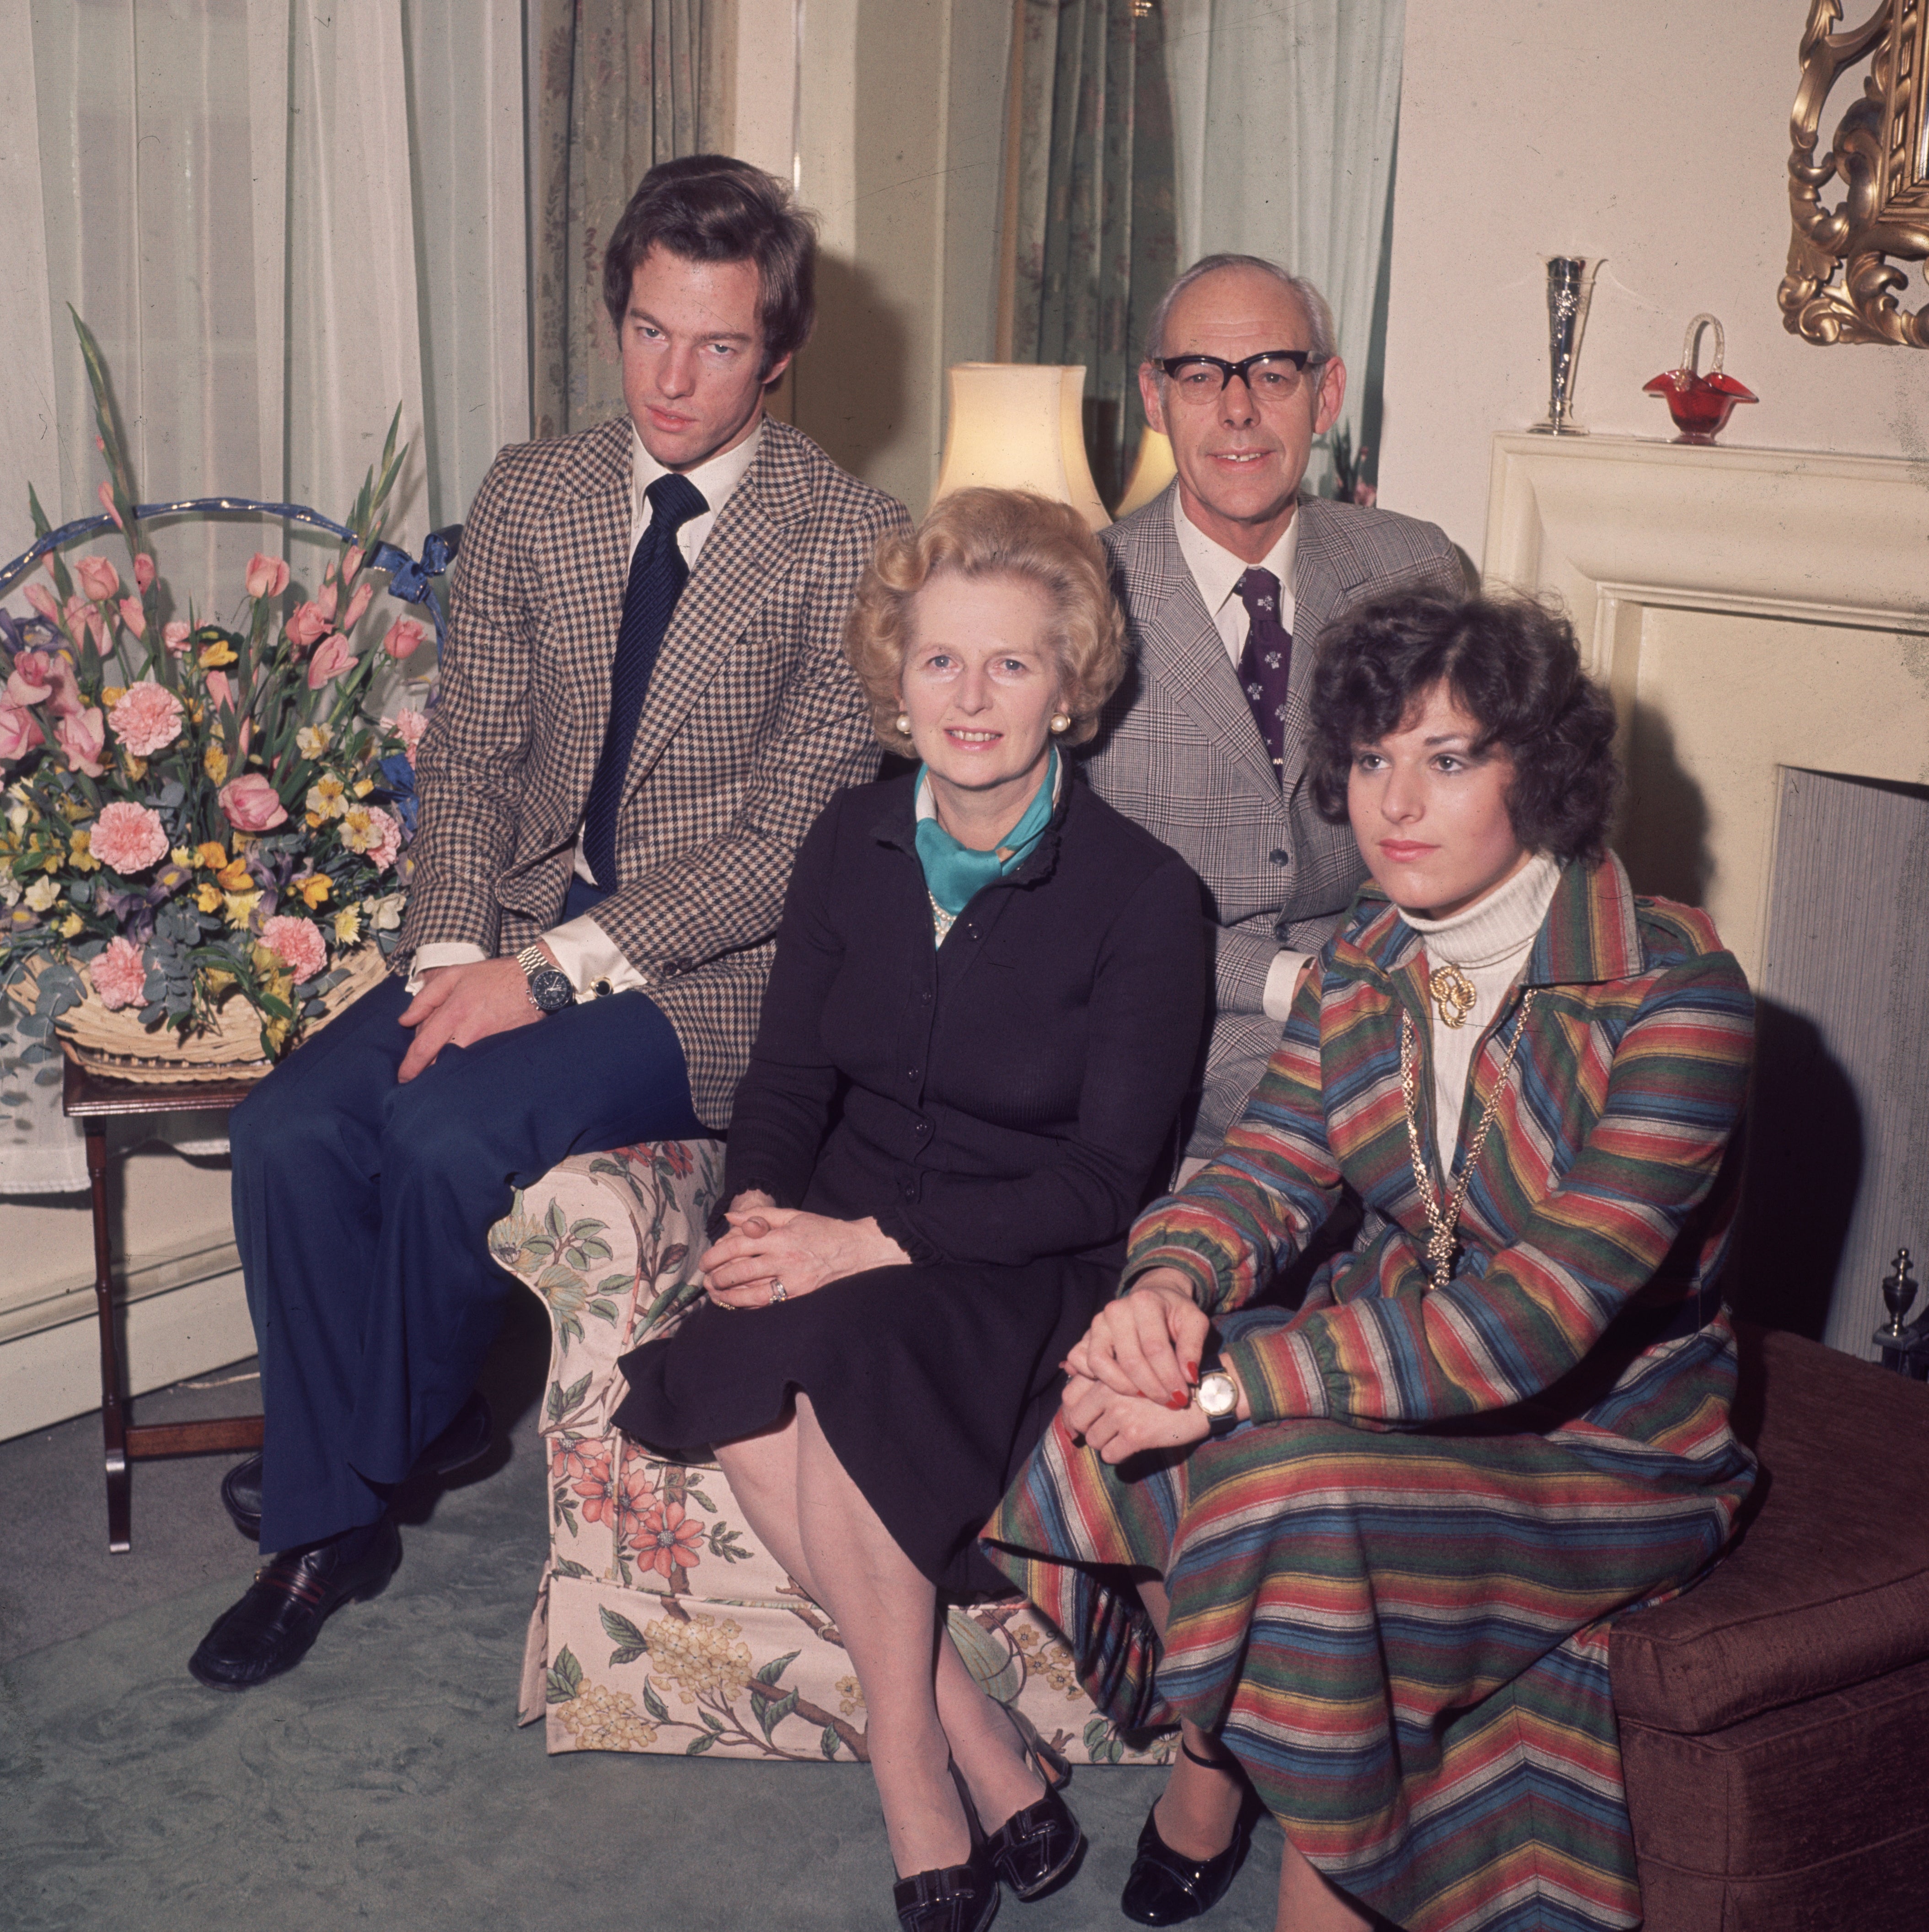 13th December 1976: British prime minister Margaret Thatcher with her husband Denis and their children Carol and Mark on the occasion of her Silver Wedding anniversary